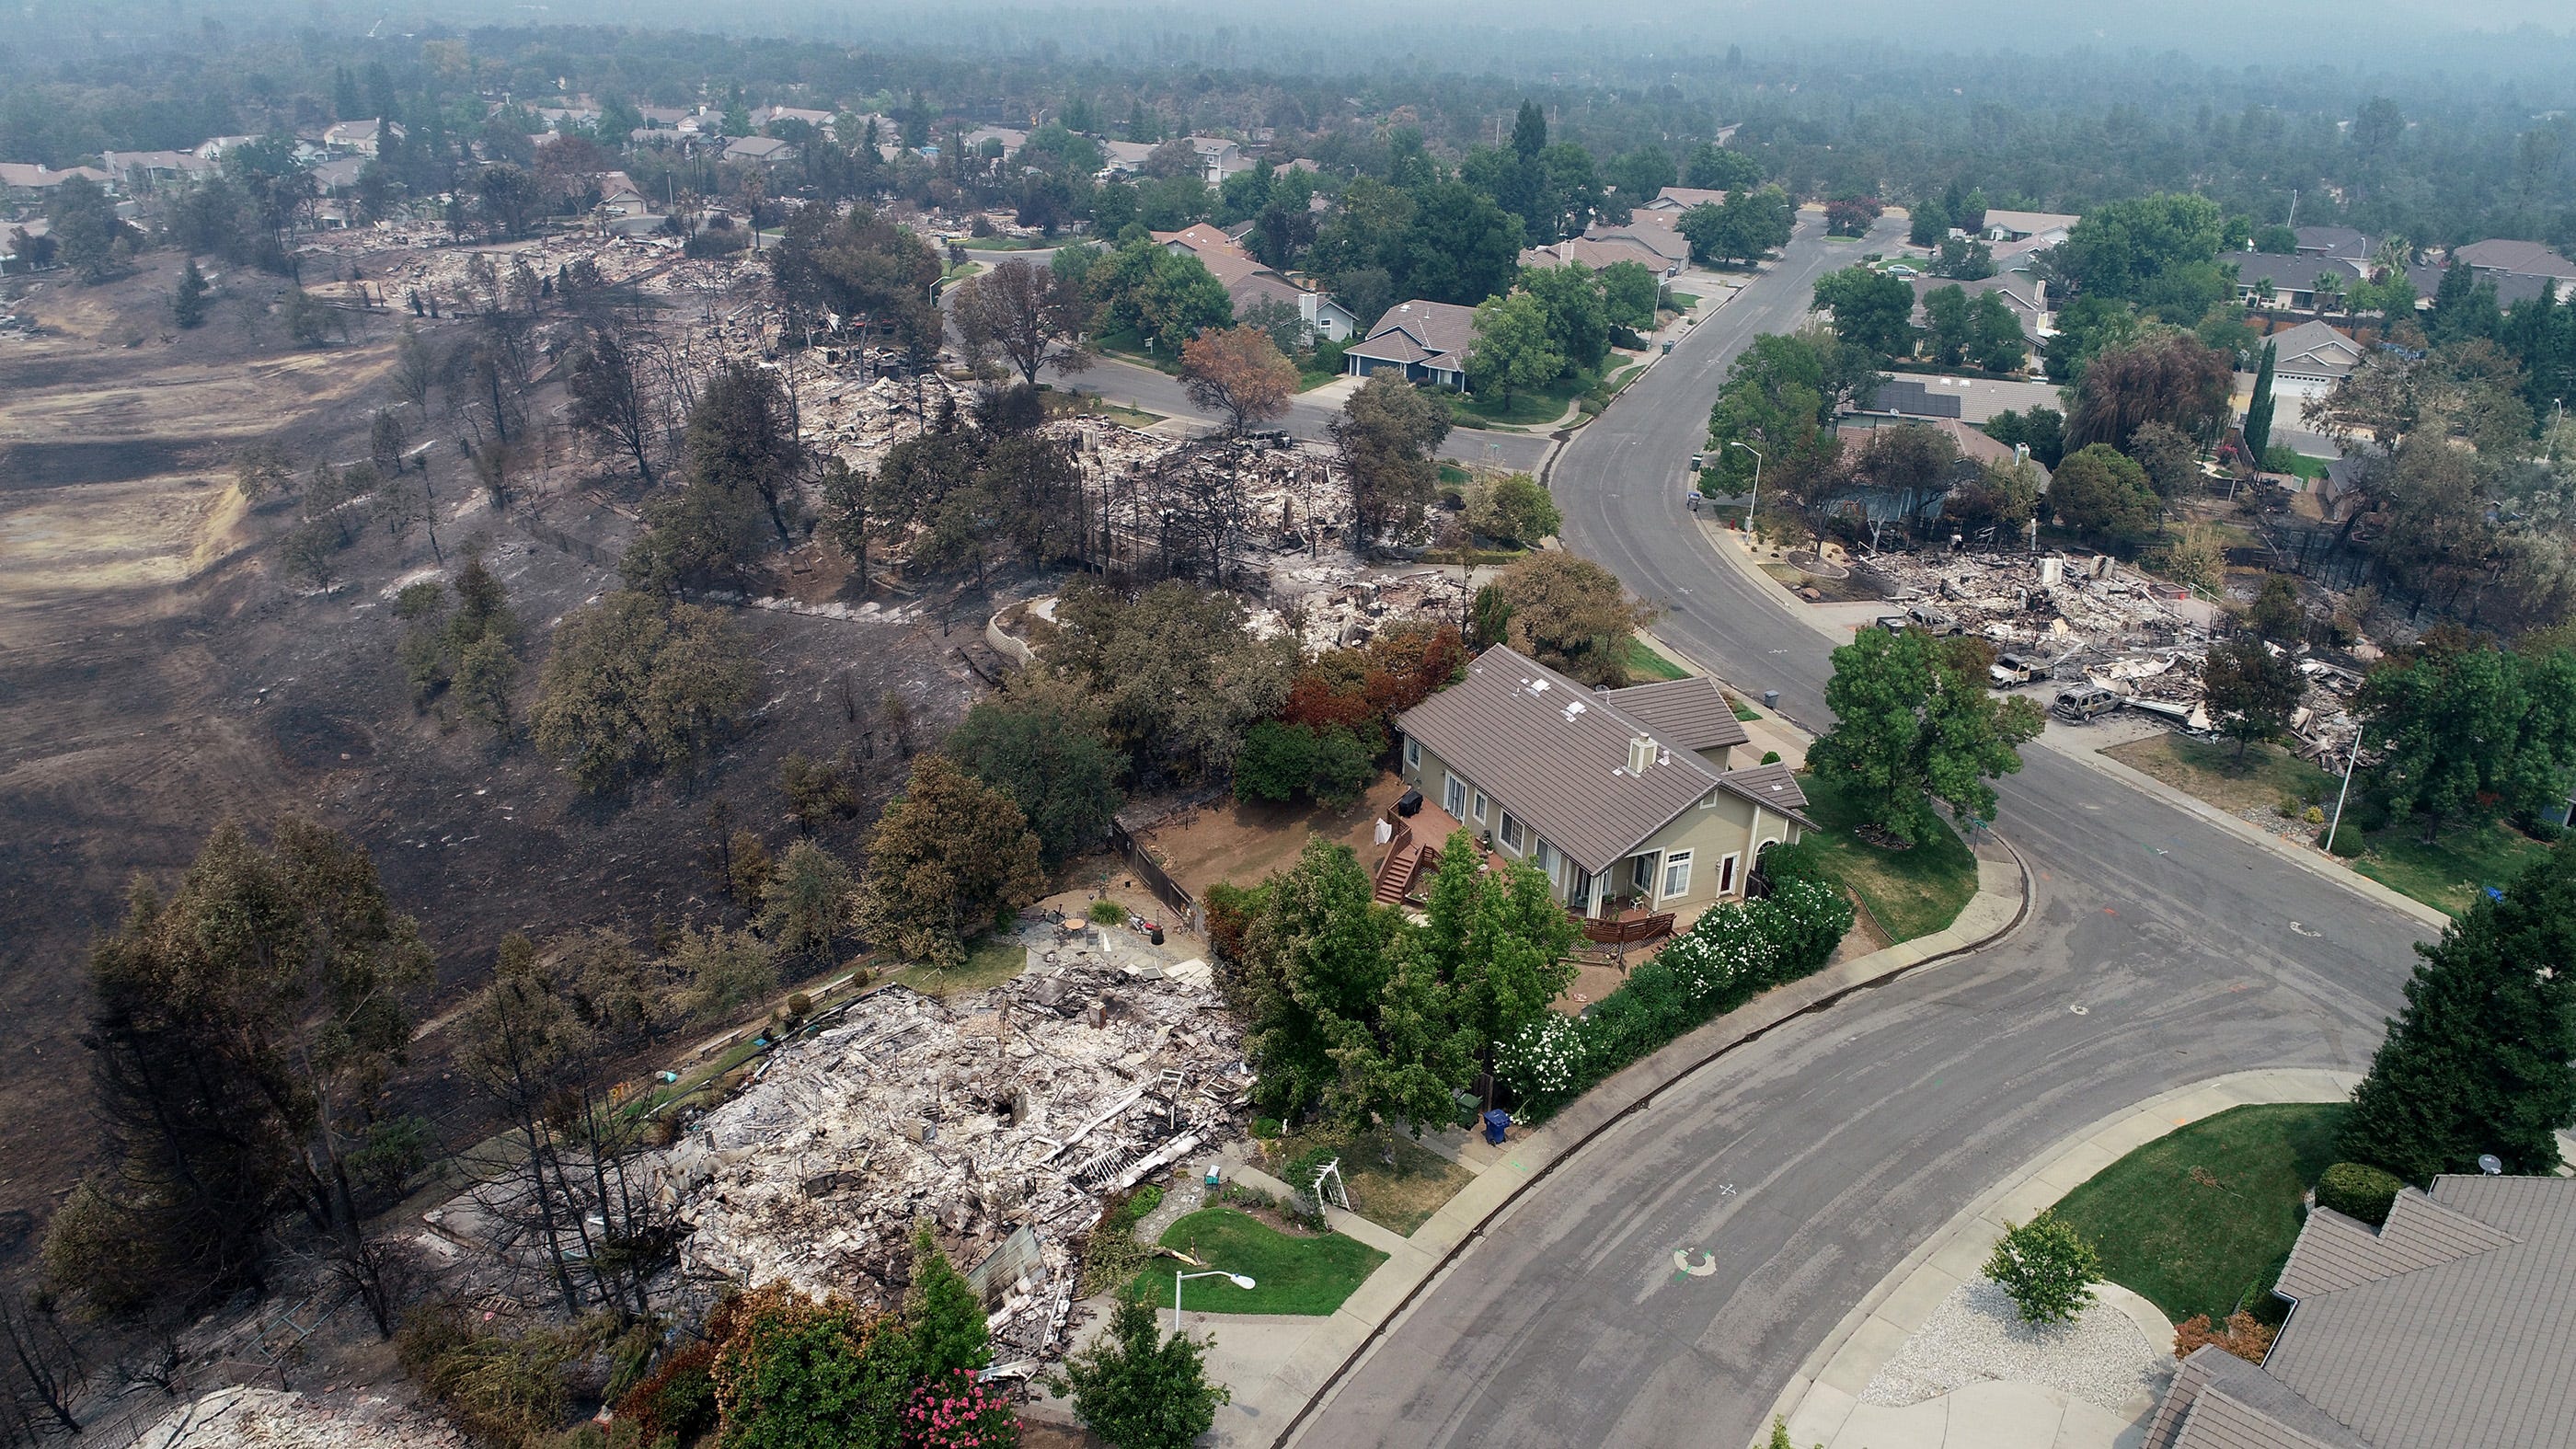 Homes in the River Ridge Park subdivision  in Redding, Calif. on Aug. 1, 2018, show damage from the Carr Fire.